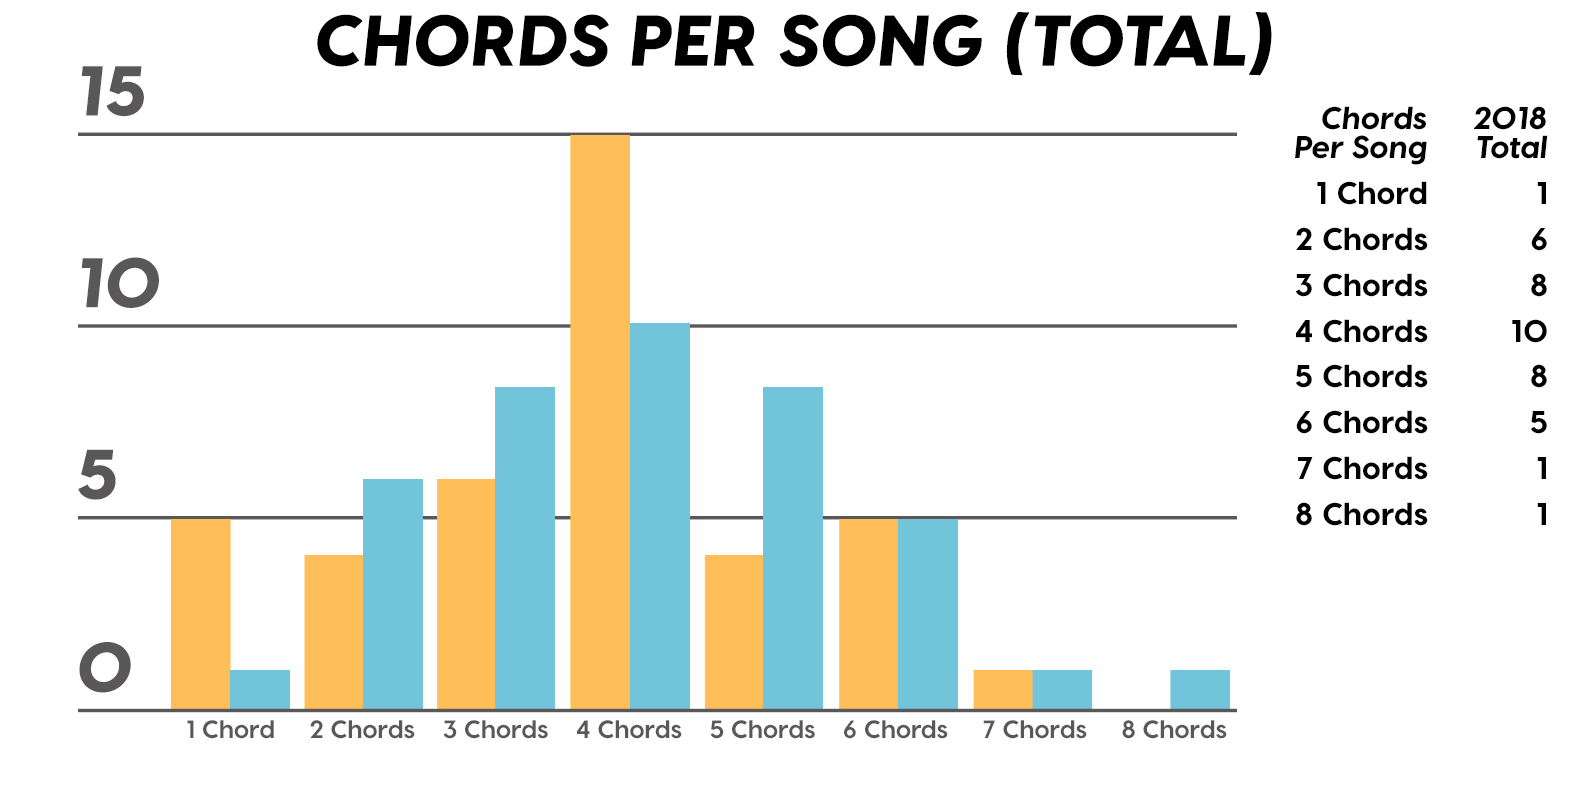 Break Every Chain Chords Analysis Of Every Billboard Top 5 Song In 2018 The Structure And